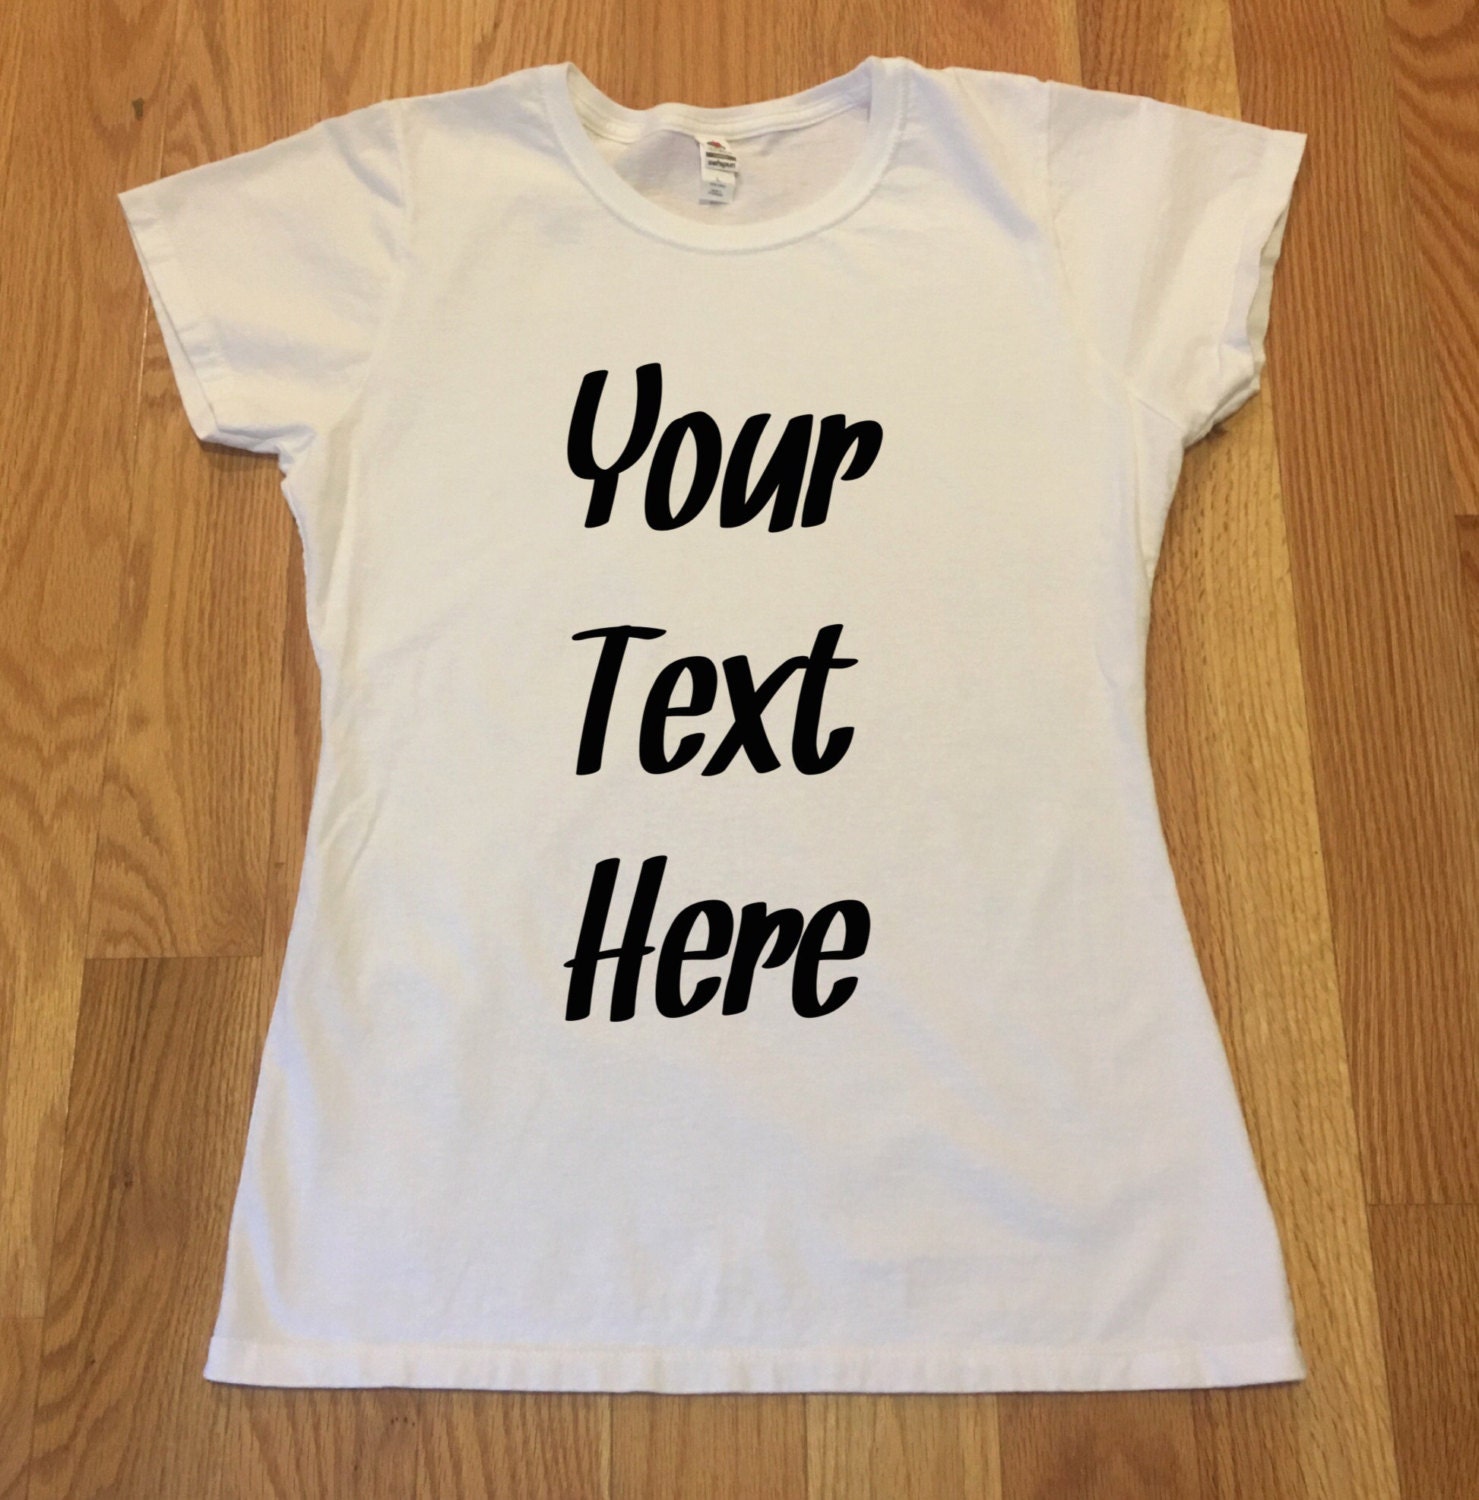 Personalized Women's T-Shirt custom made with your own